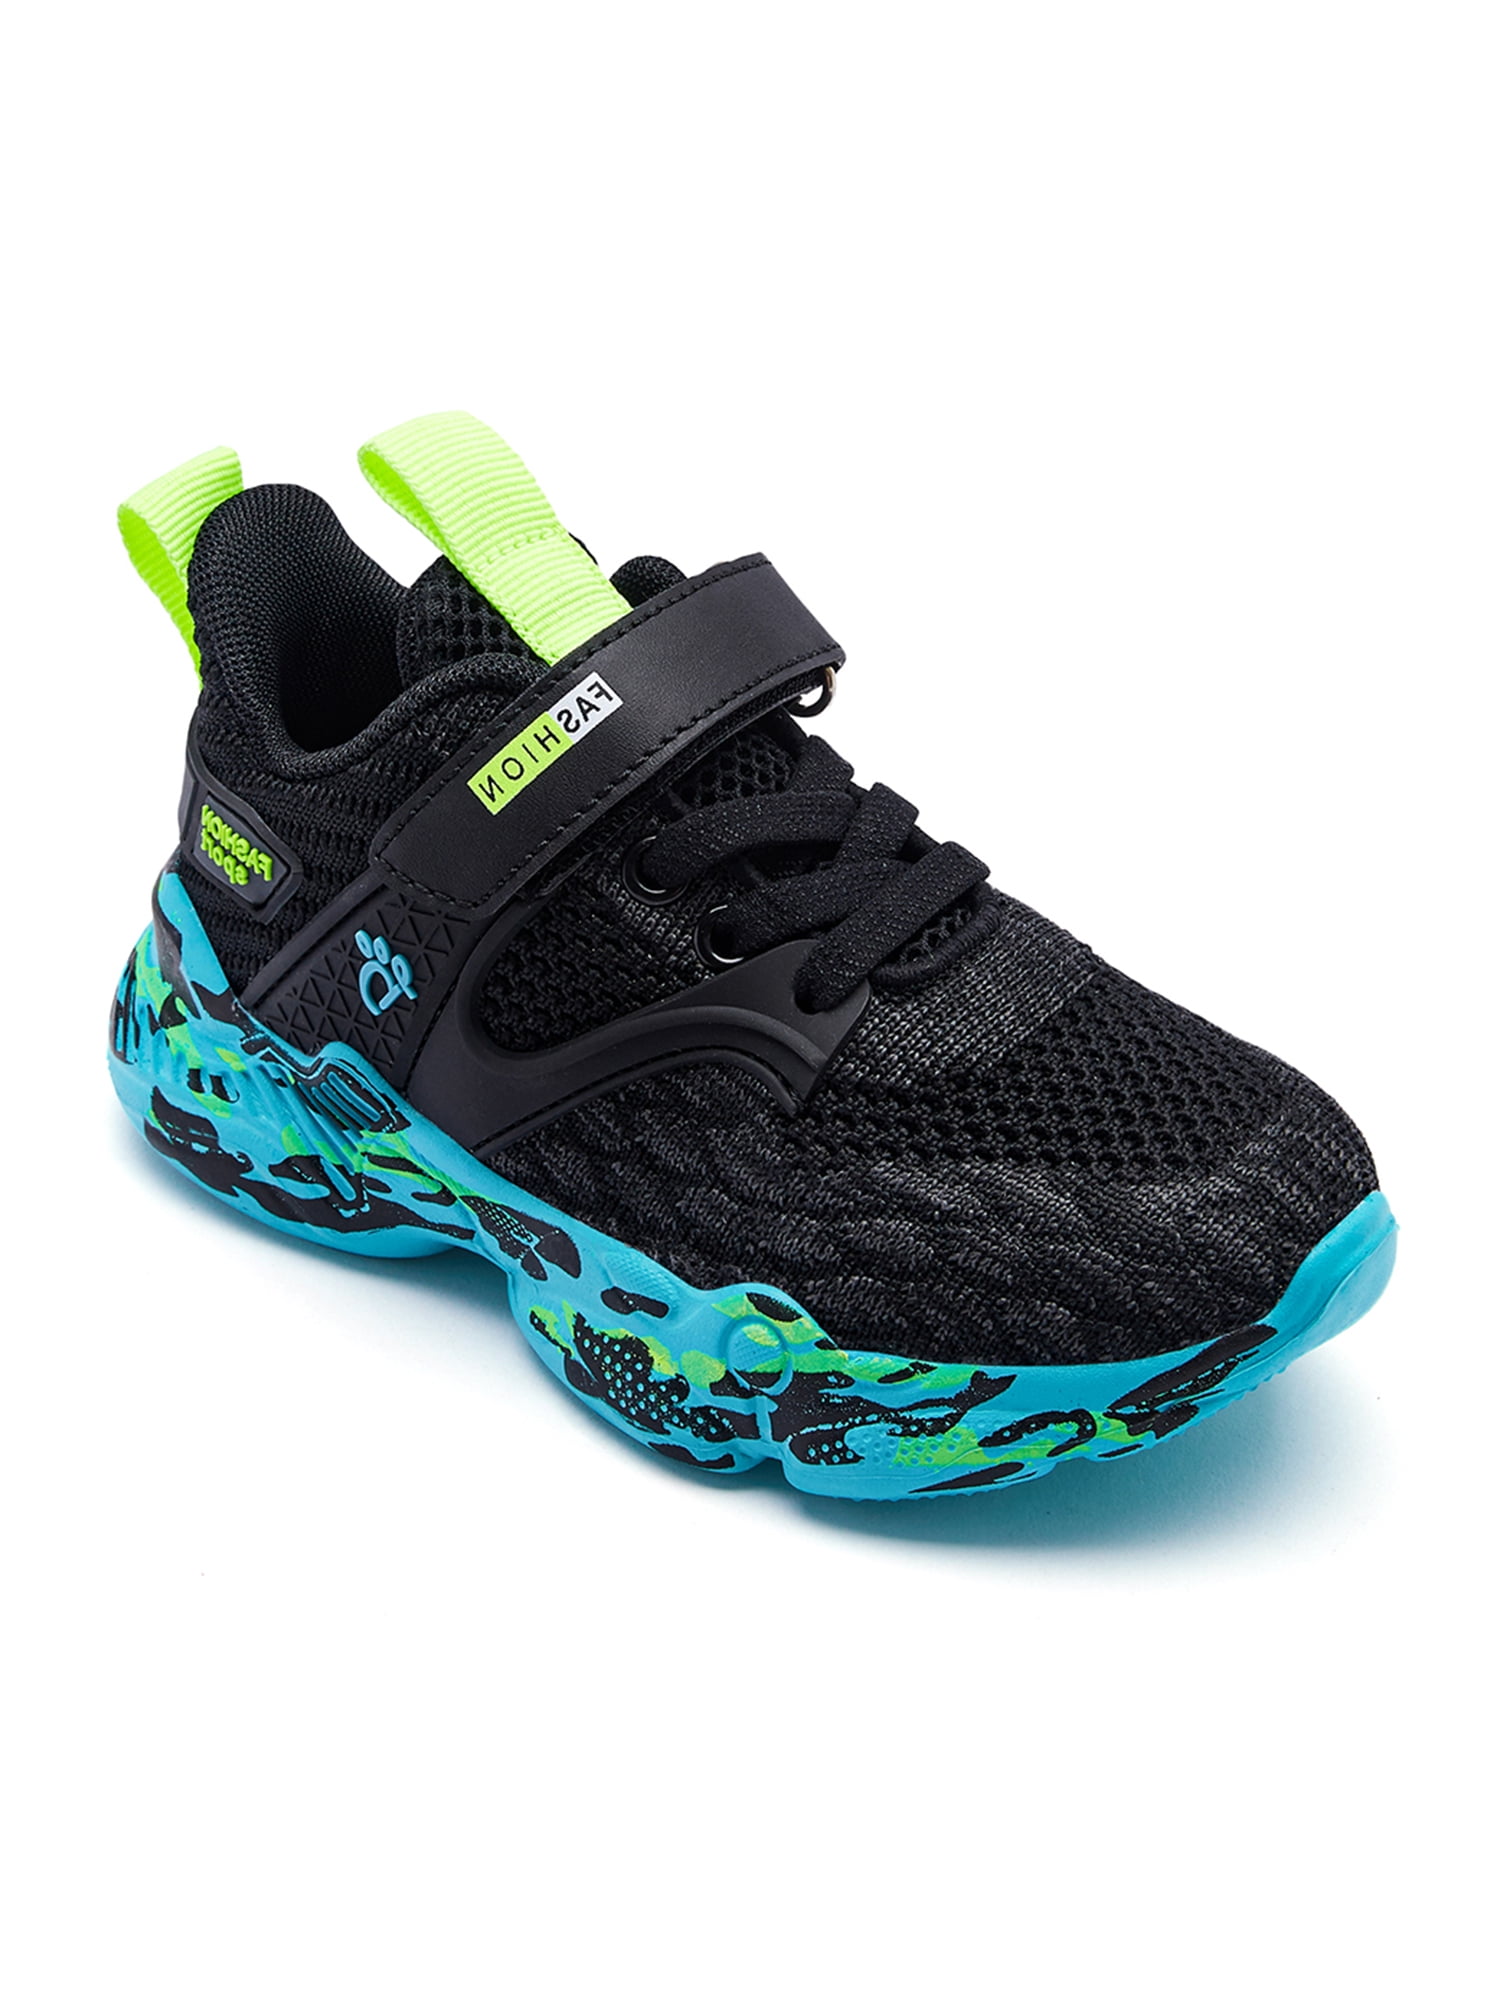 BUDDY Boys Breathable Knit Sneakers Mesh Athletic Shoes